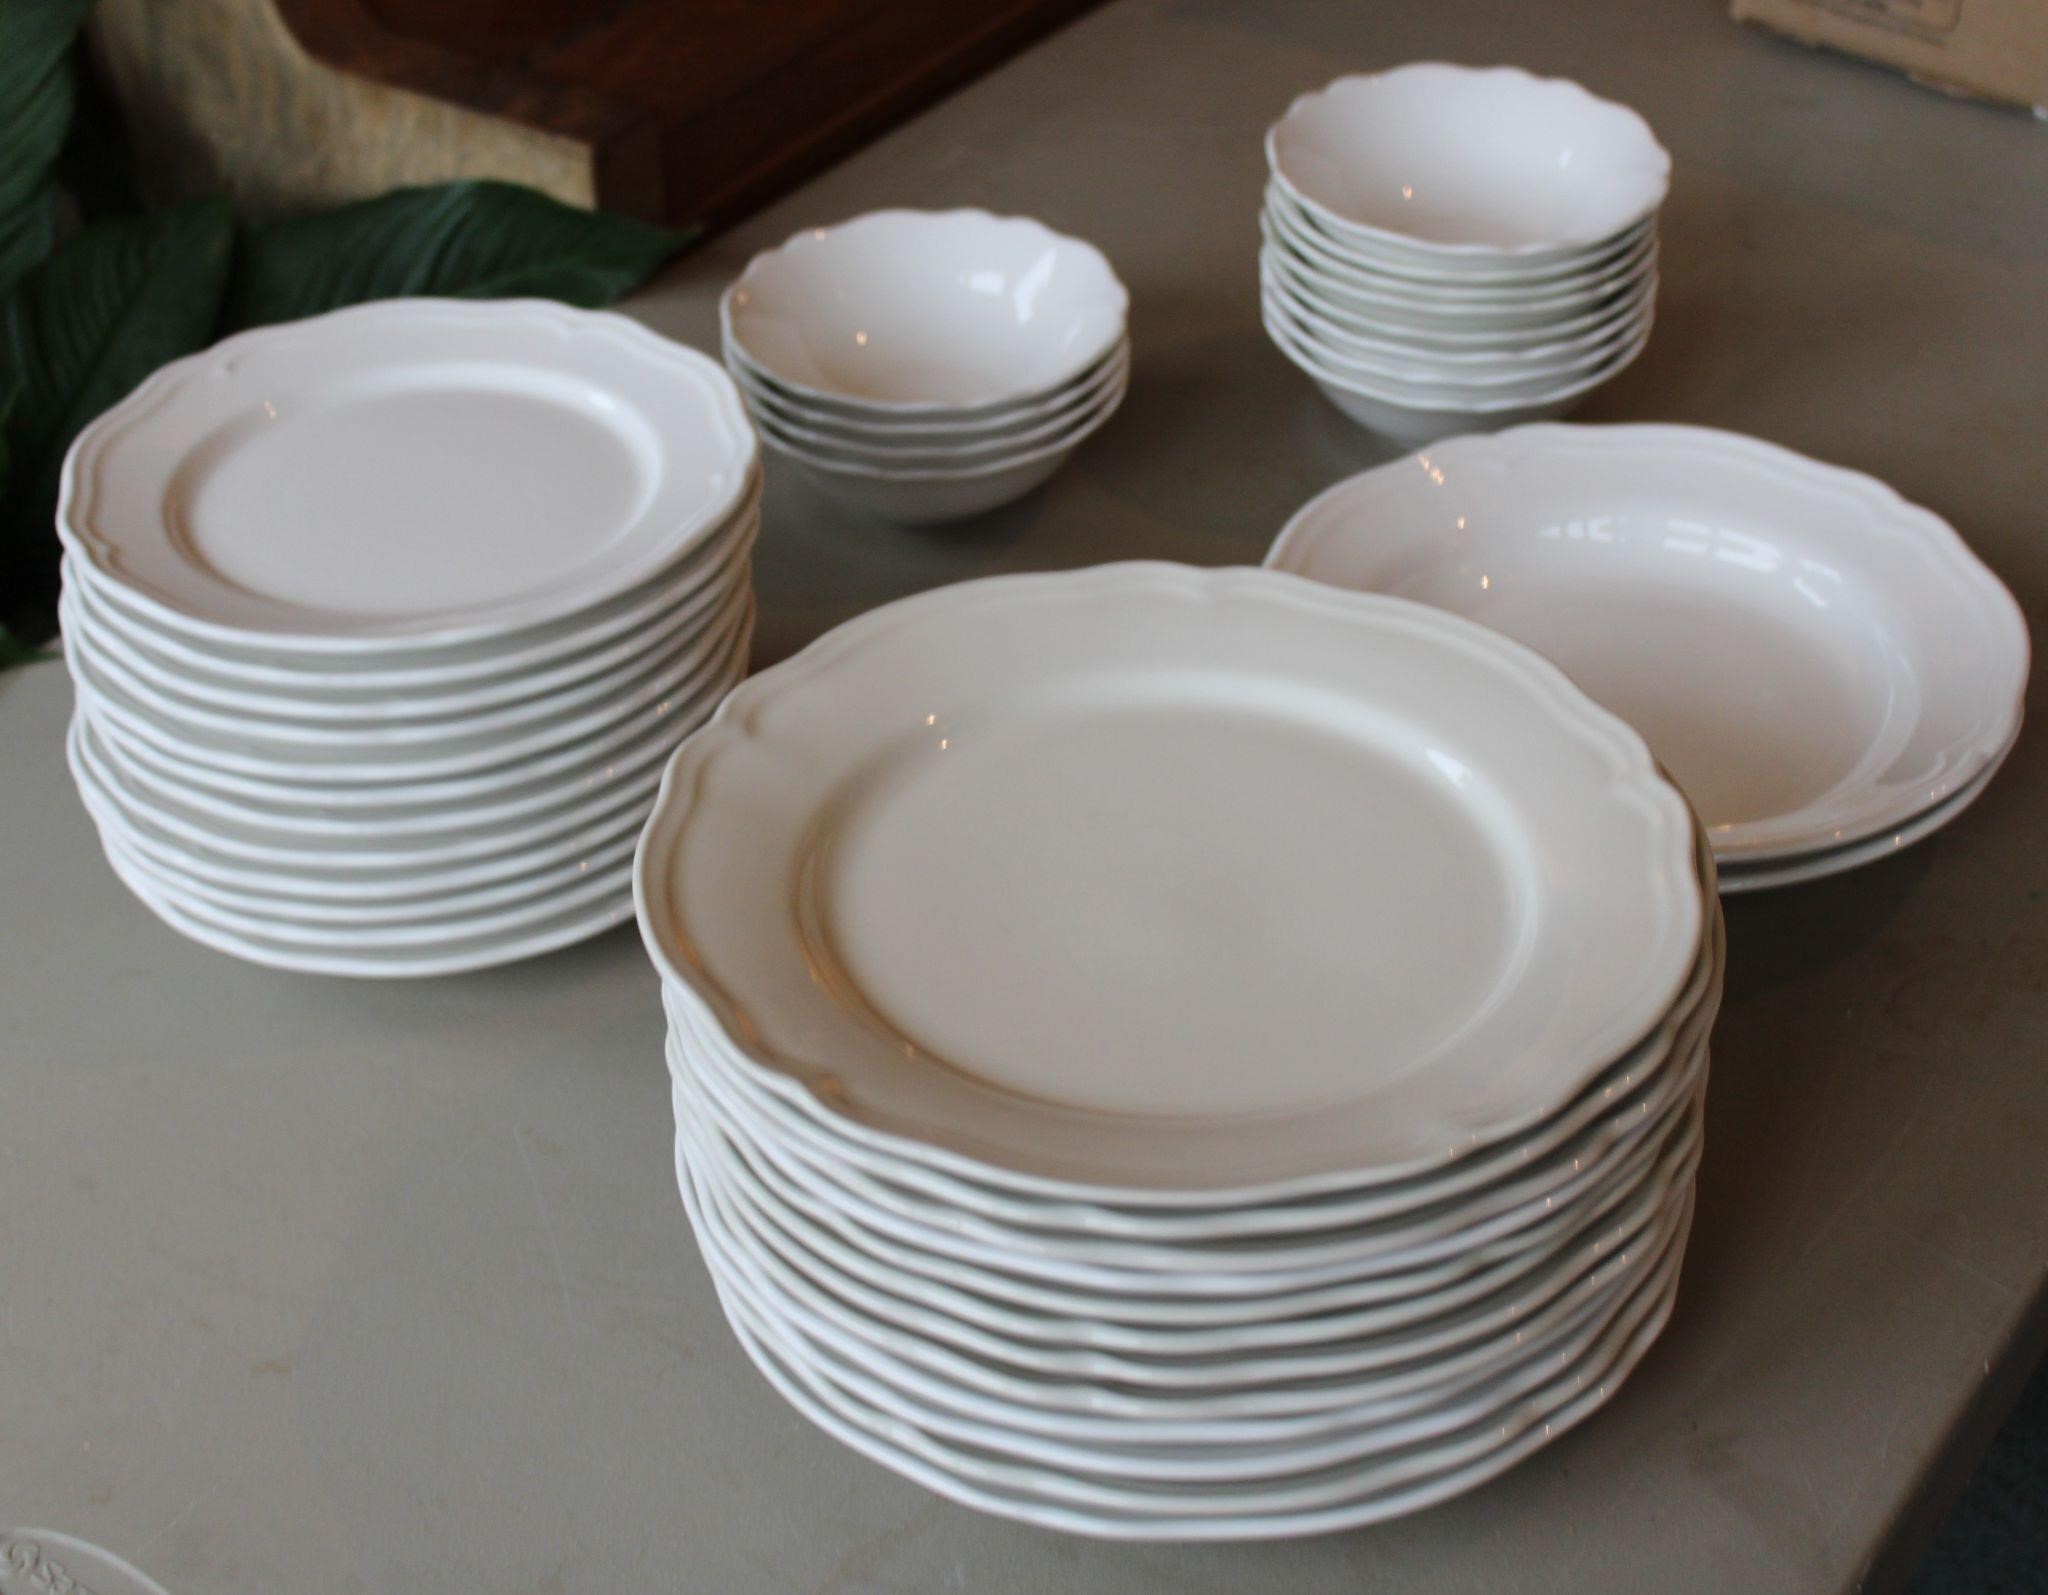 Ikea Dishes 11" Plates 37 Pieces